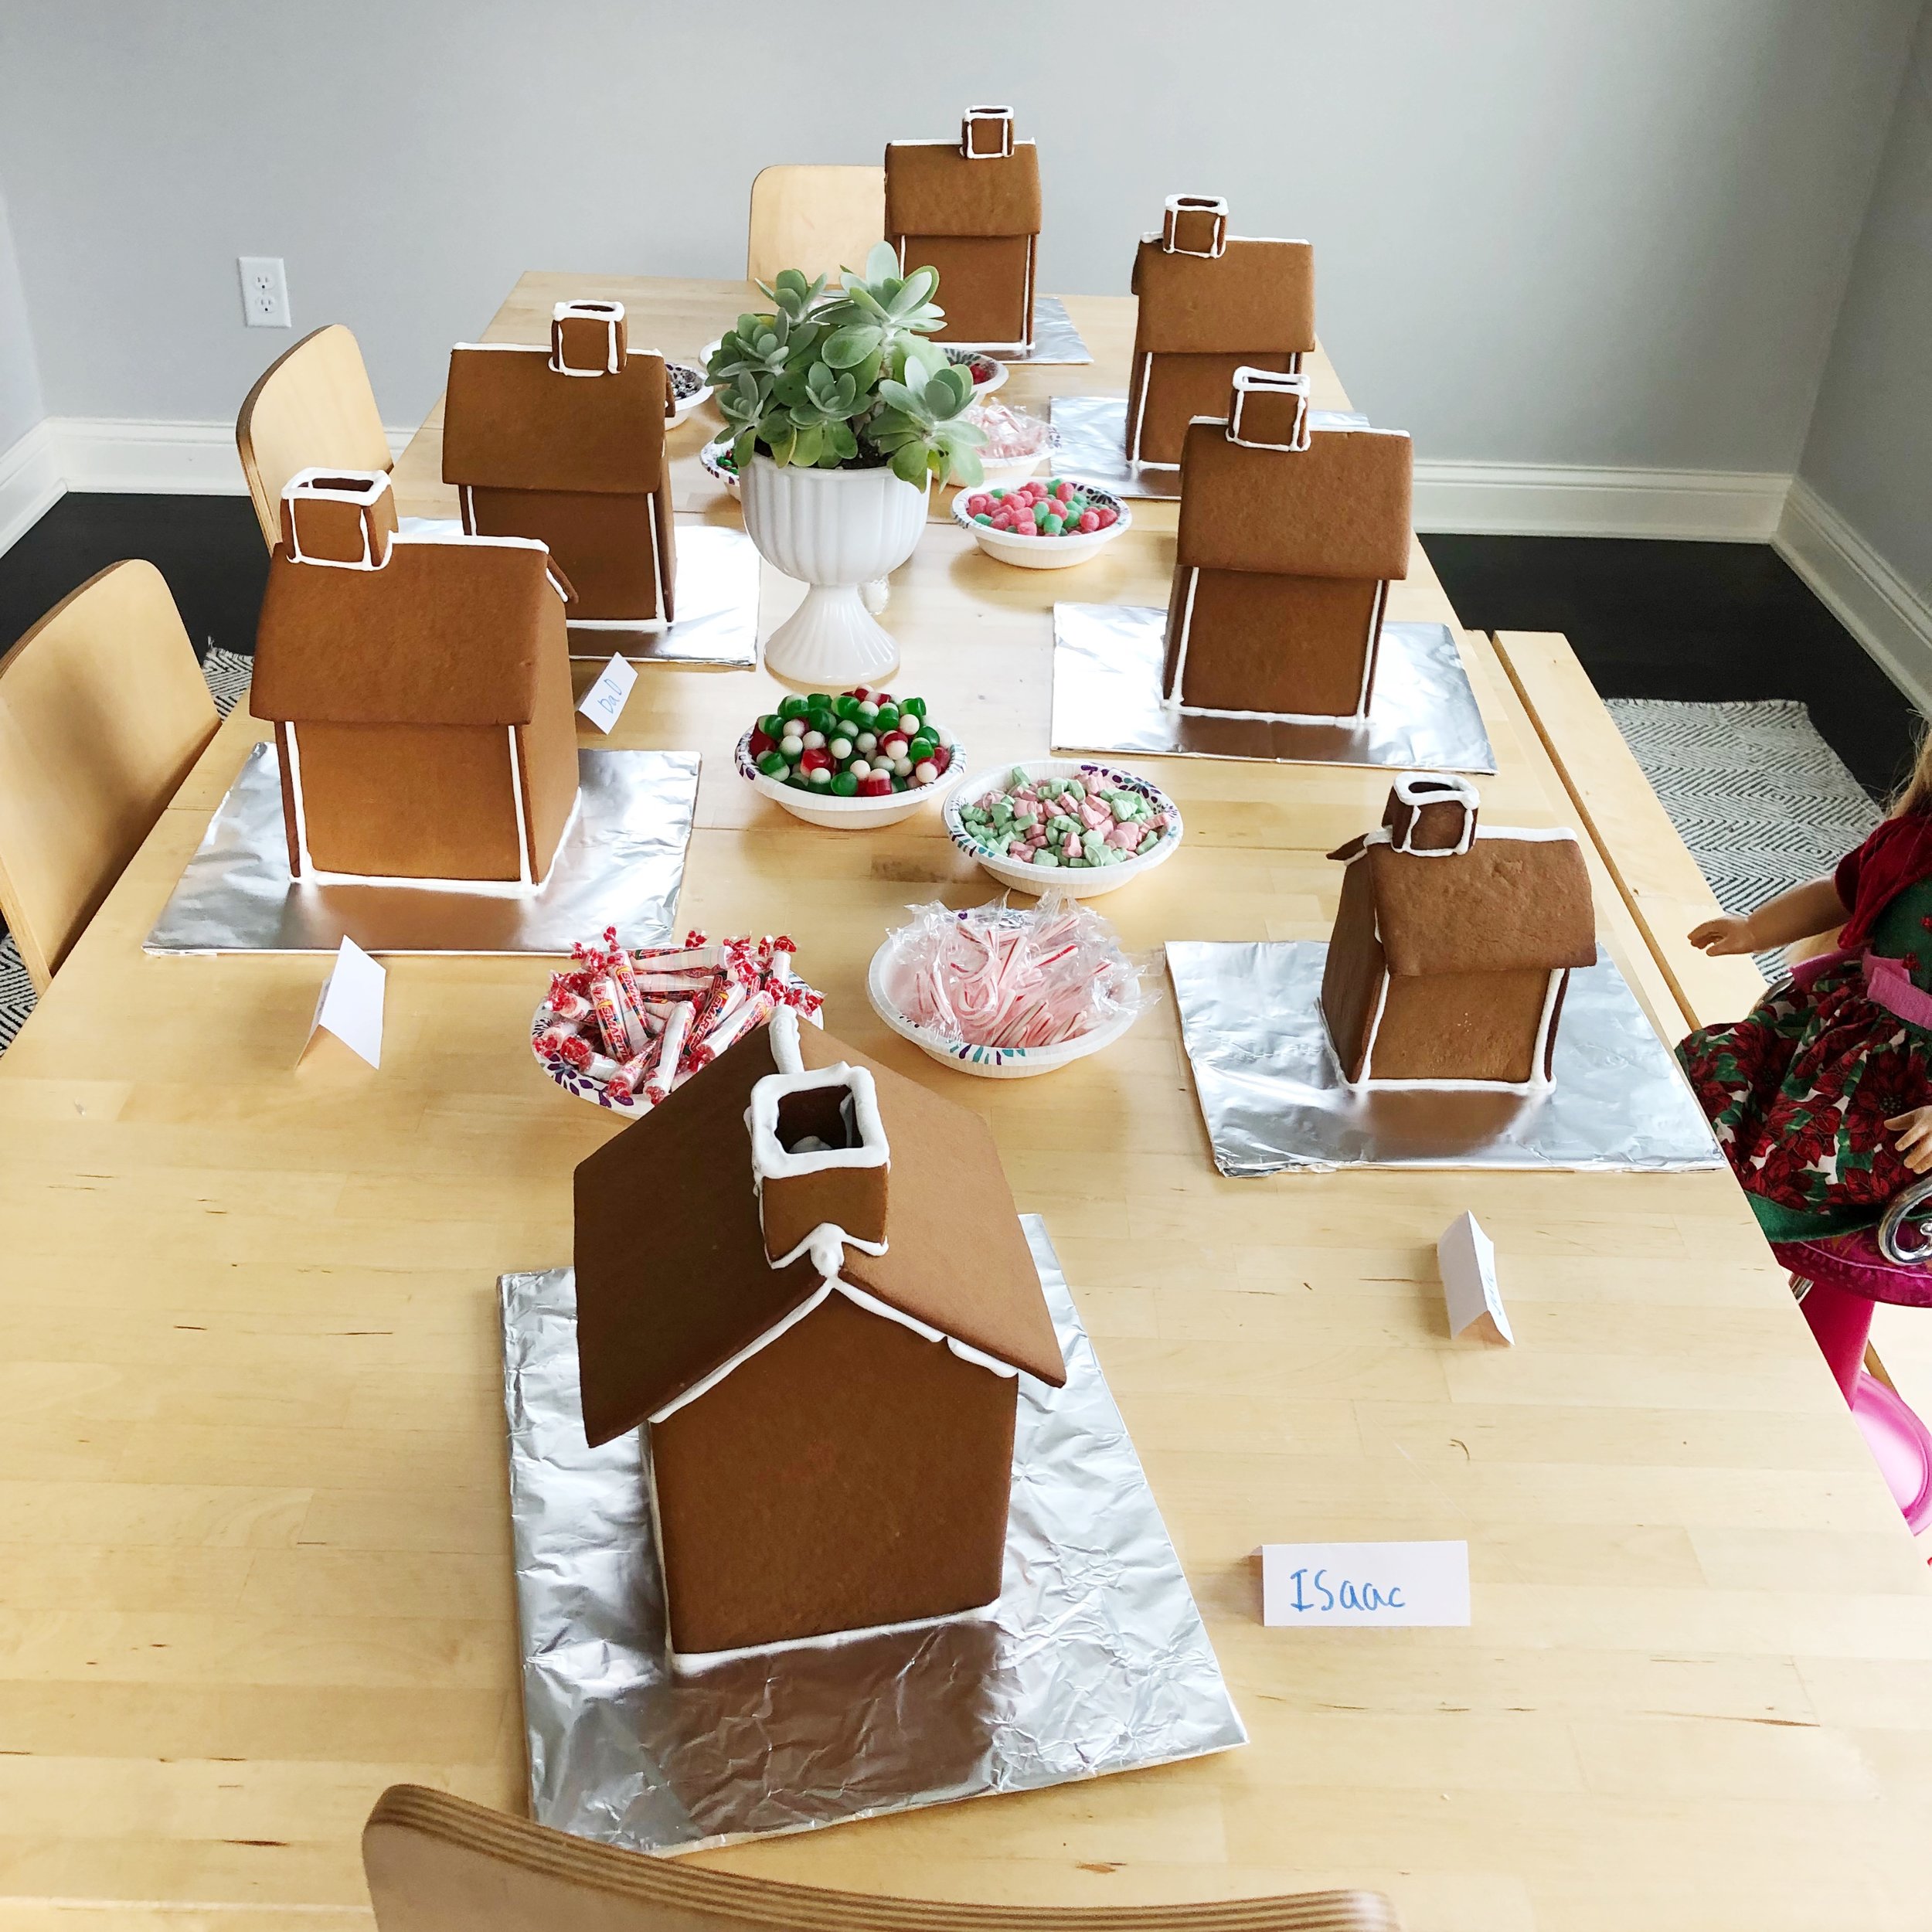 Making gingerbread houses from scratch. Free recipe and template.